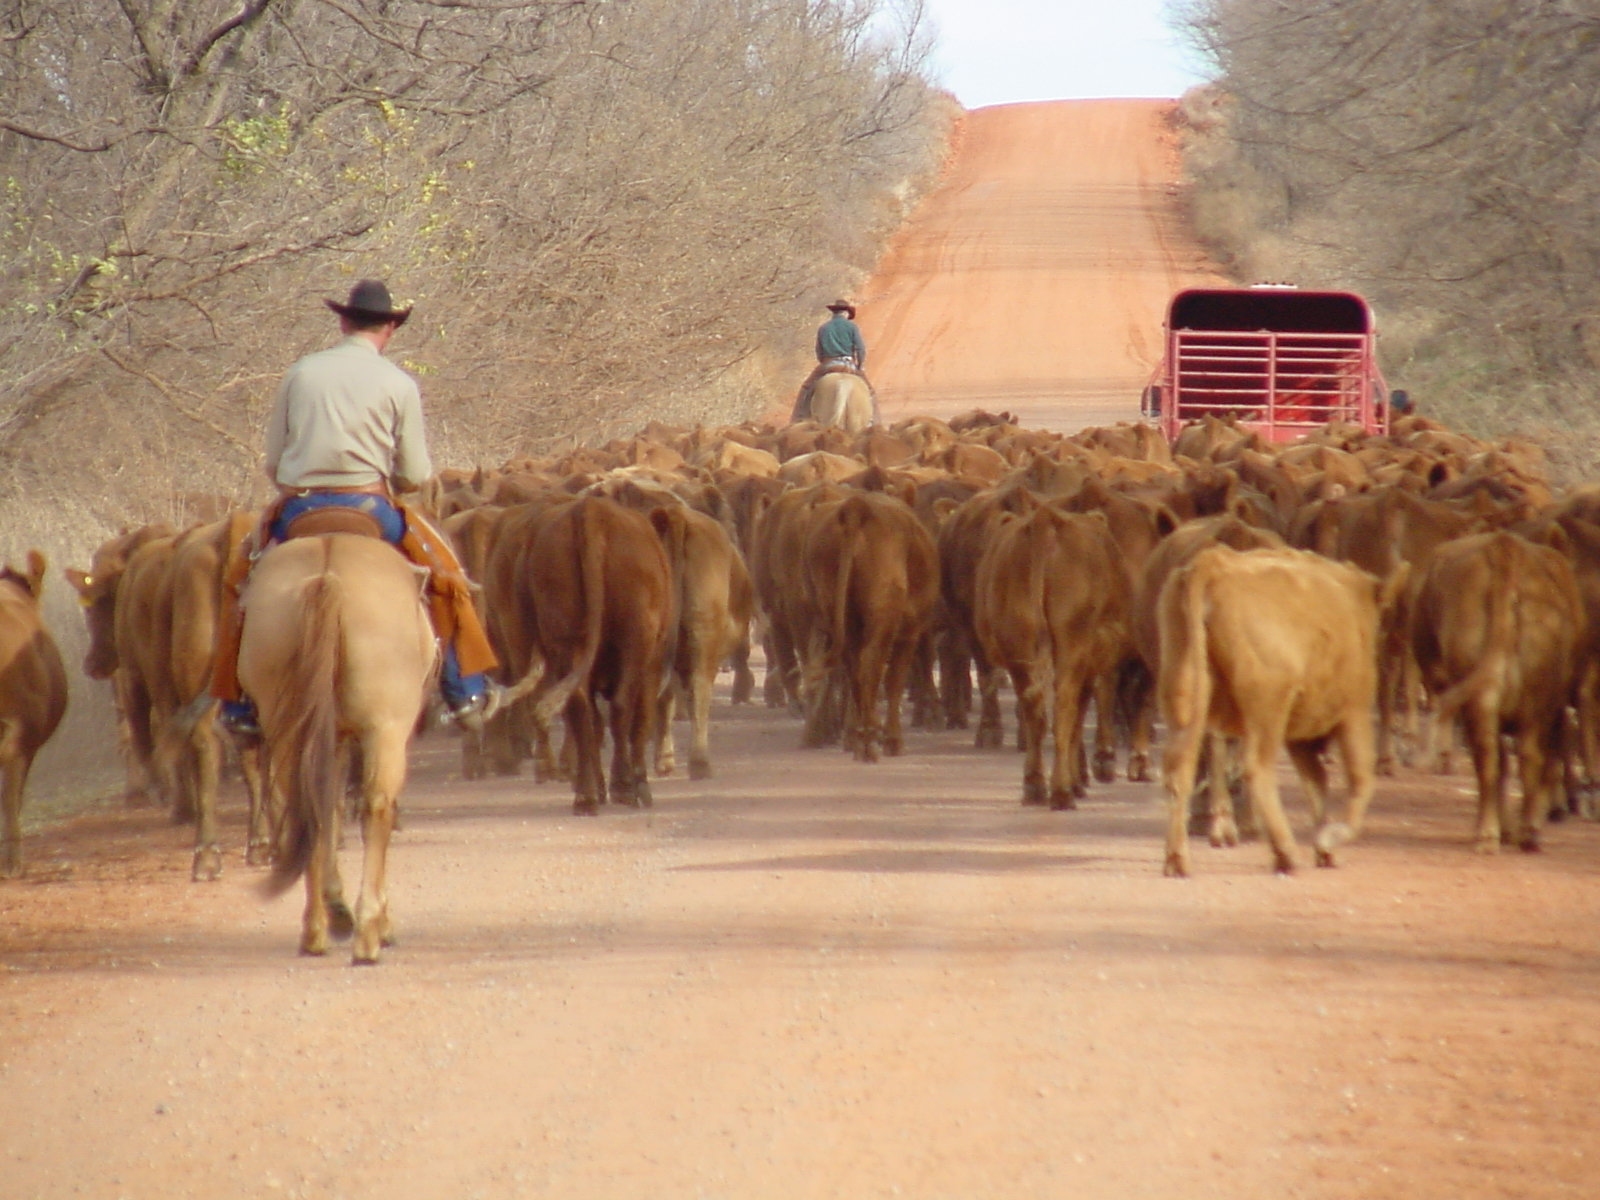 Two ranchers rounding up cattle on a dusty road